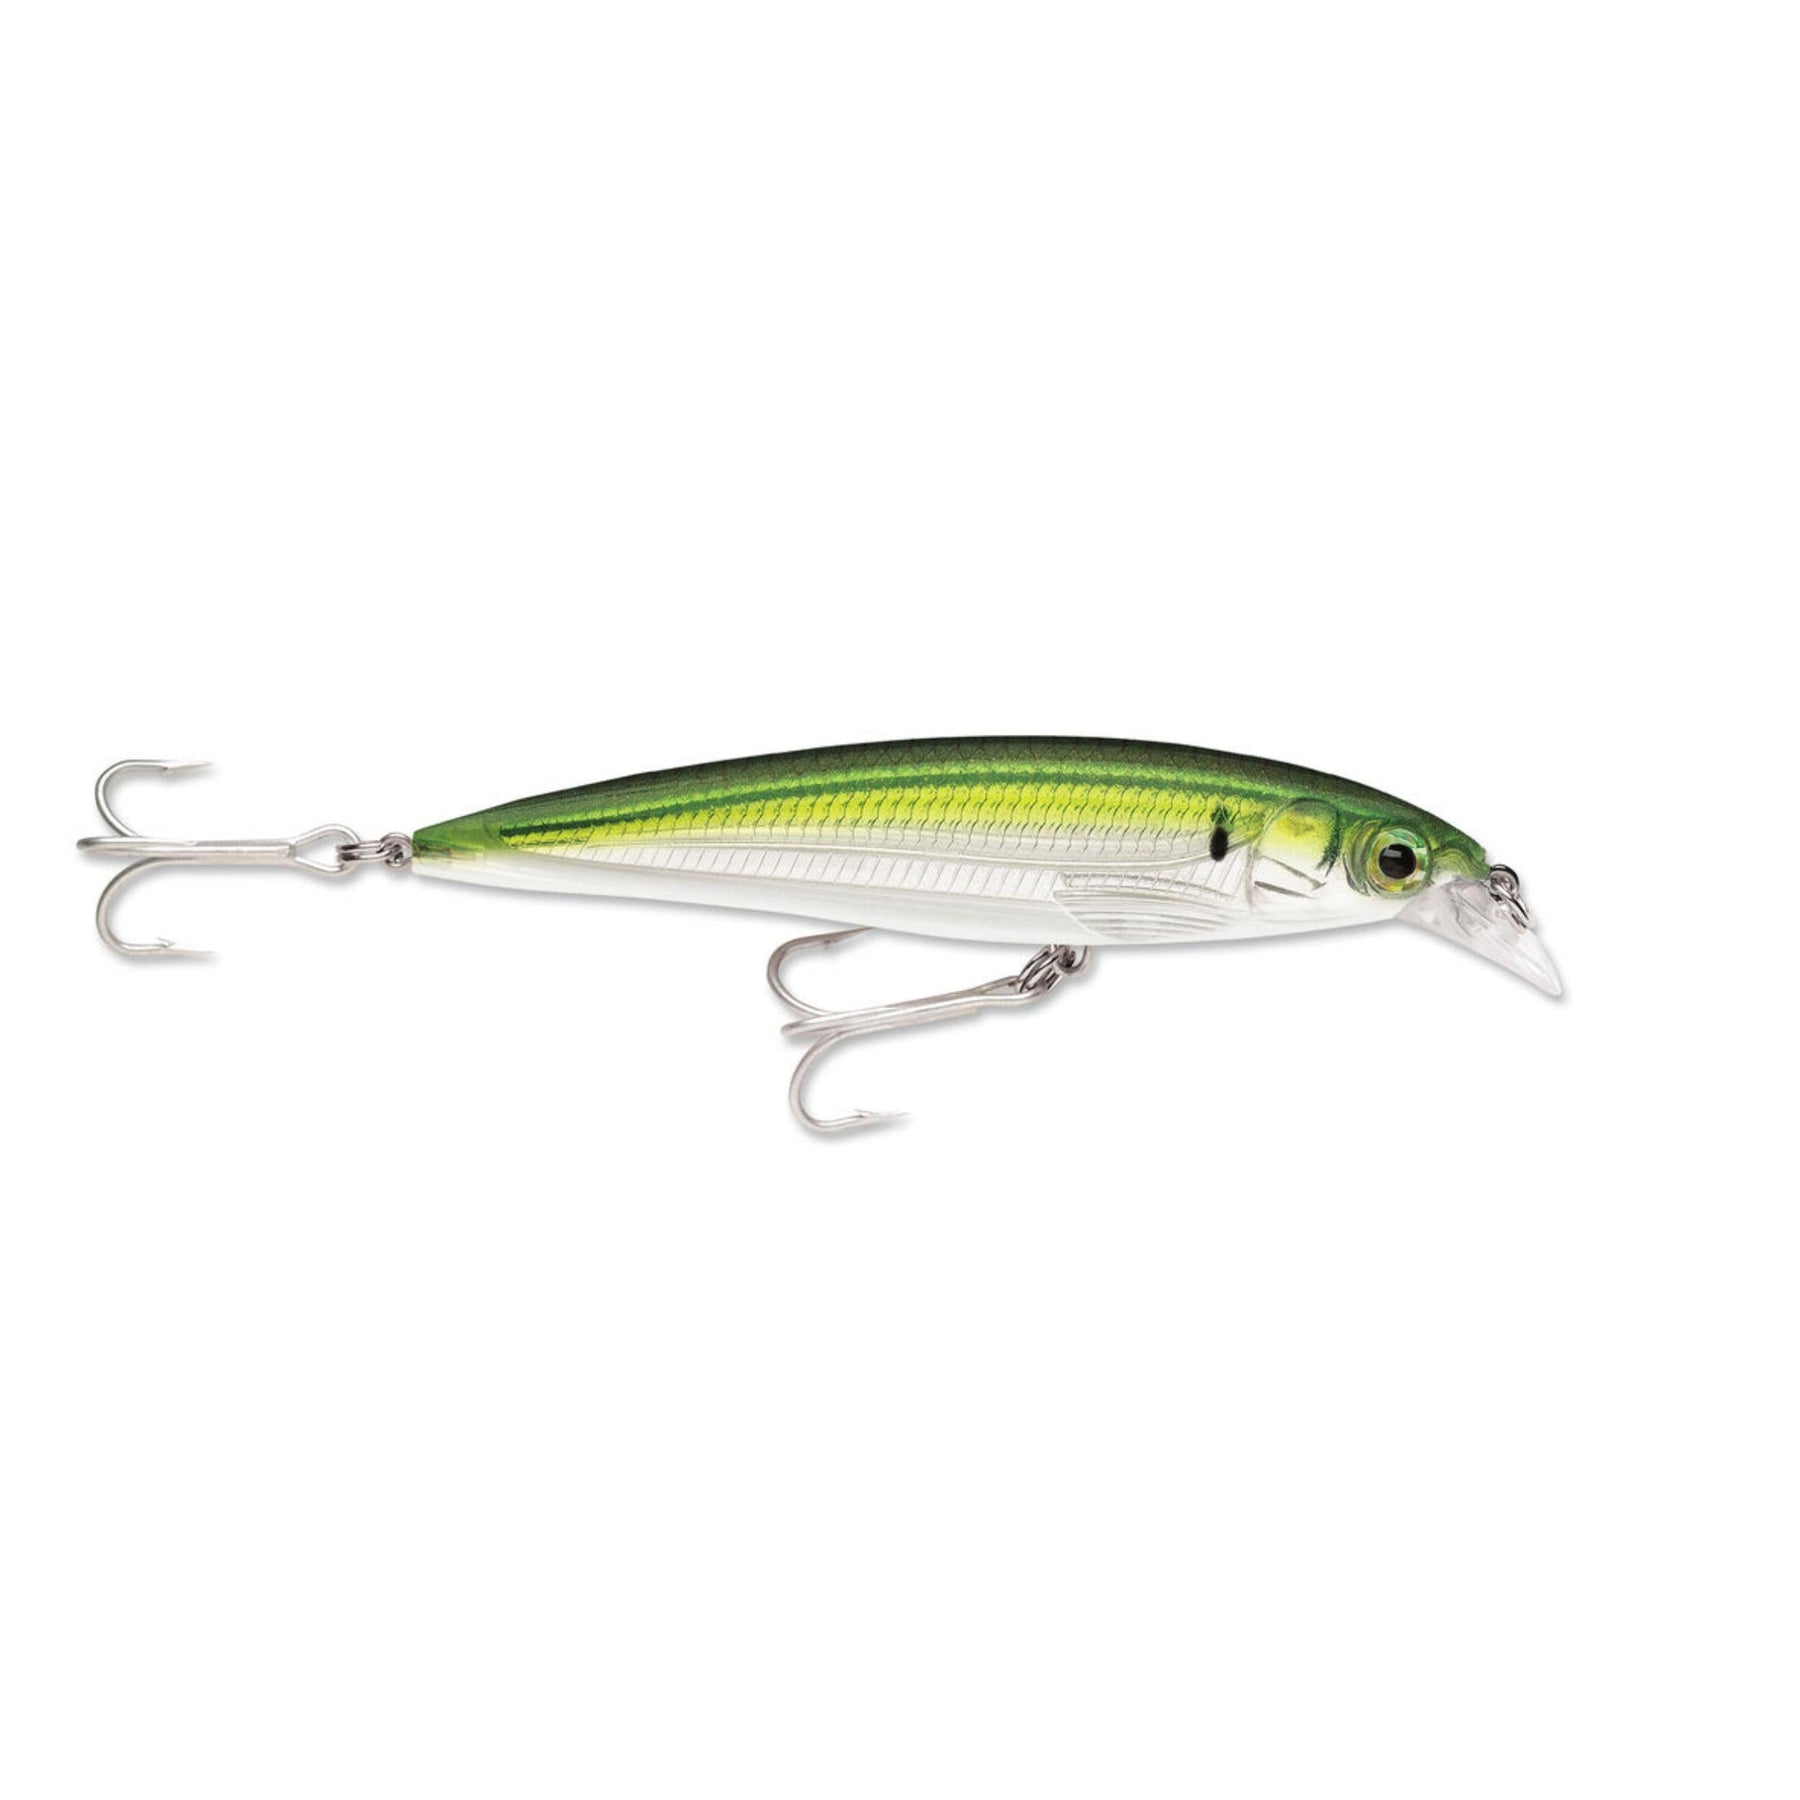 Rapala X-Rap SXR 10 Review - Best Saltwater Lure for Shore Fishing